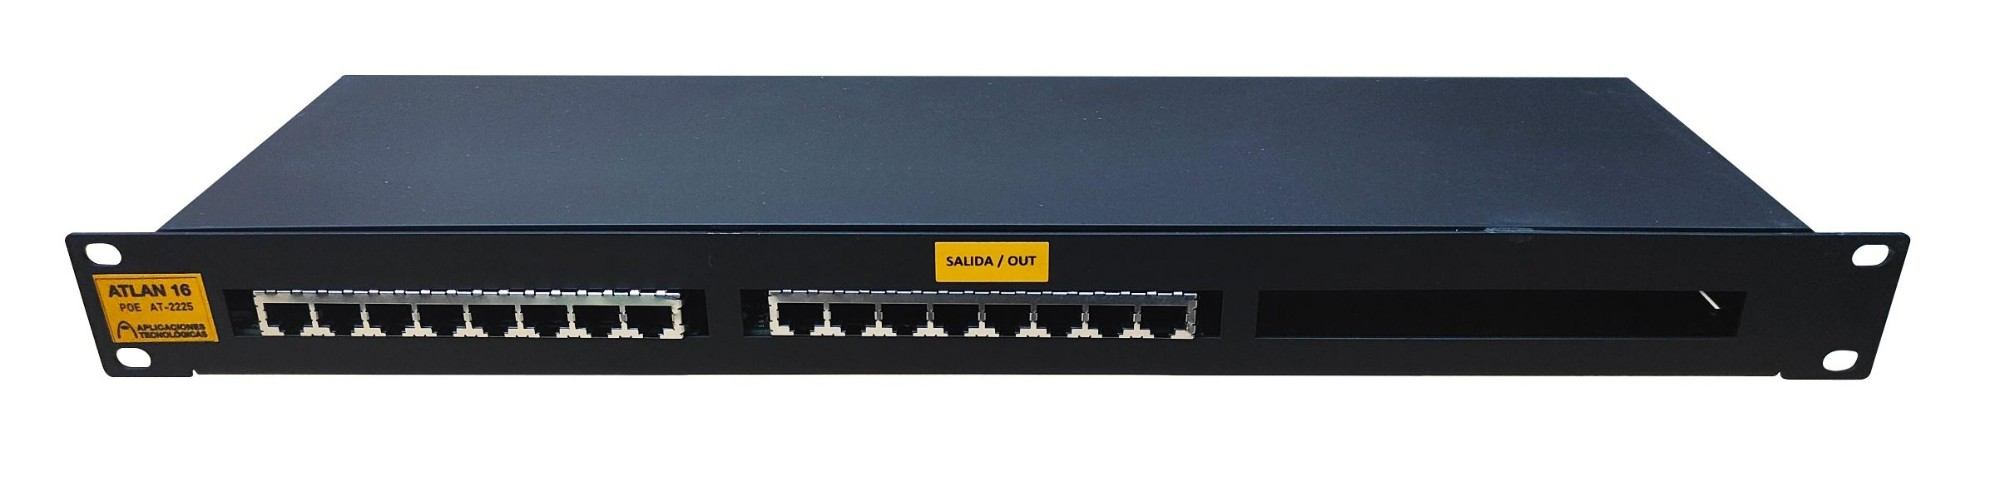 ATLAN 16 POE 19" patch panel surge protector for 16 ports PoE and 1Gb Ethernet